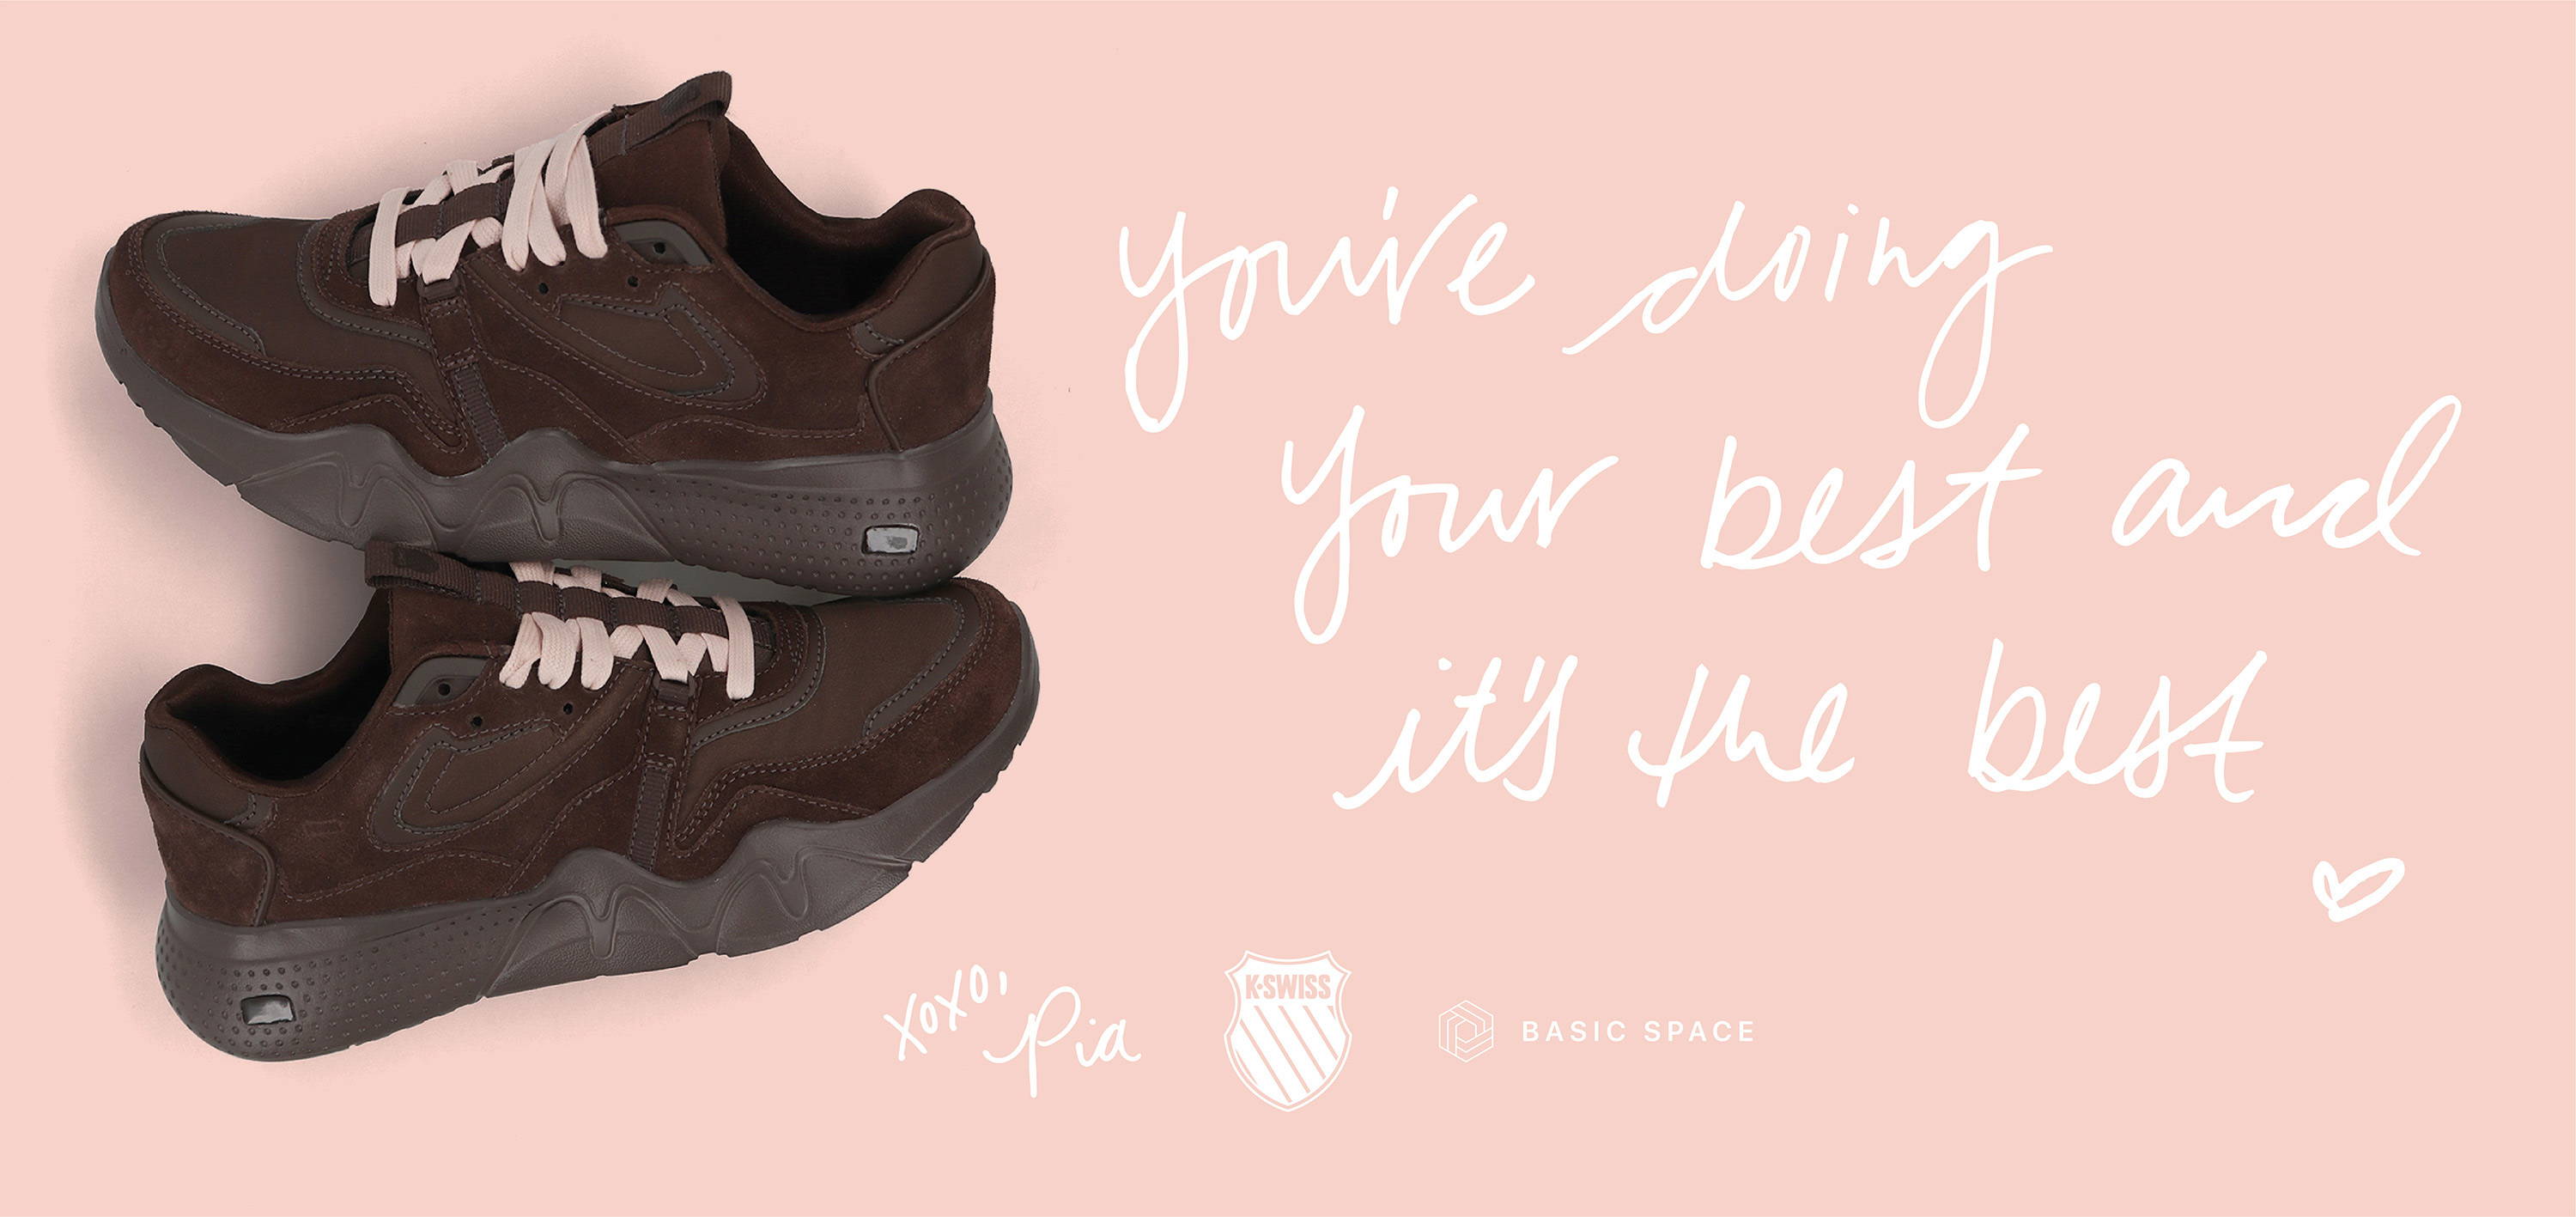 Pia X K-Swiss Collaboration: you're doing your best and it's the best.